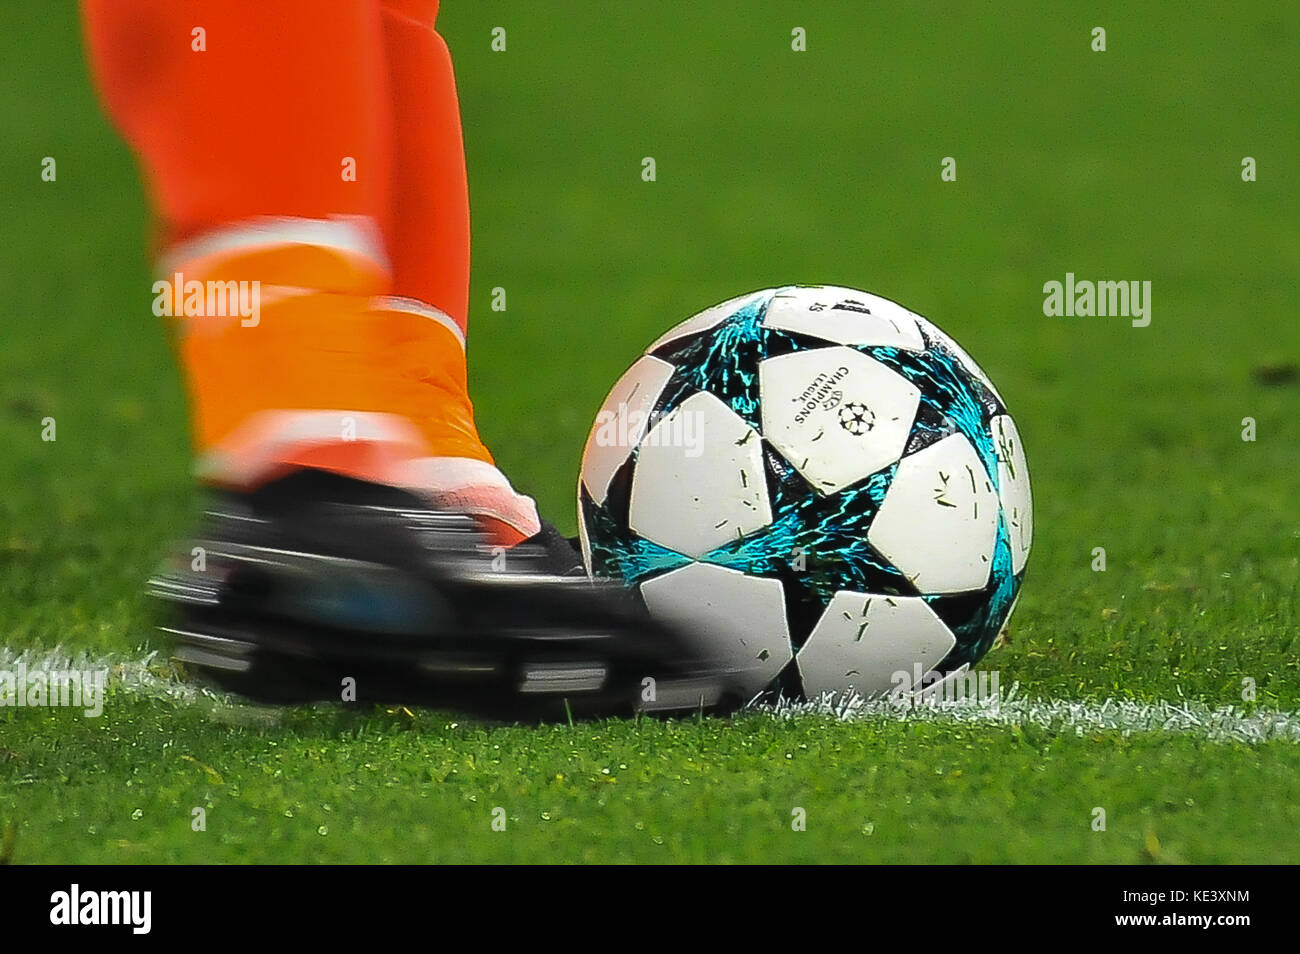 Turin, Italy. 18th Oct, 2017. during the UEFA Champions League football match between Juventus FC and Sporting Lisbona at Allianz Stadium on 18 October, 2017 in Turin, Italy. Credit: FABIO PETROSINO/Alamy Live News Stock Photo